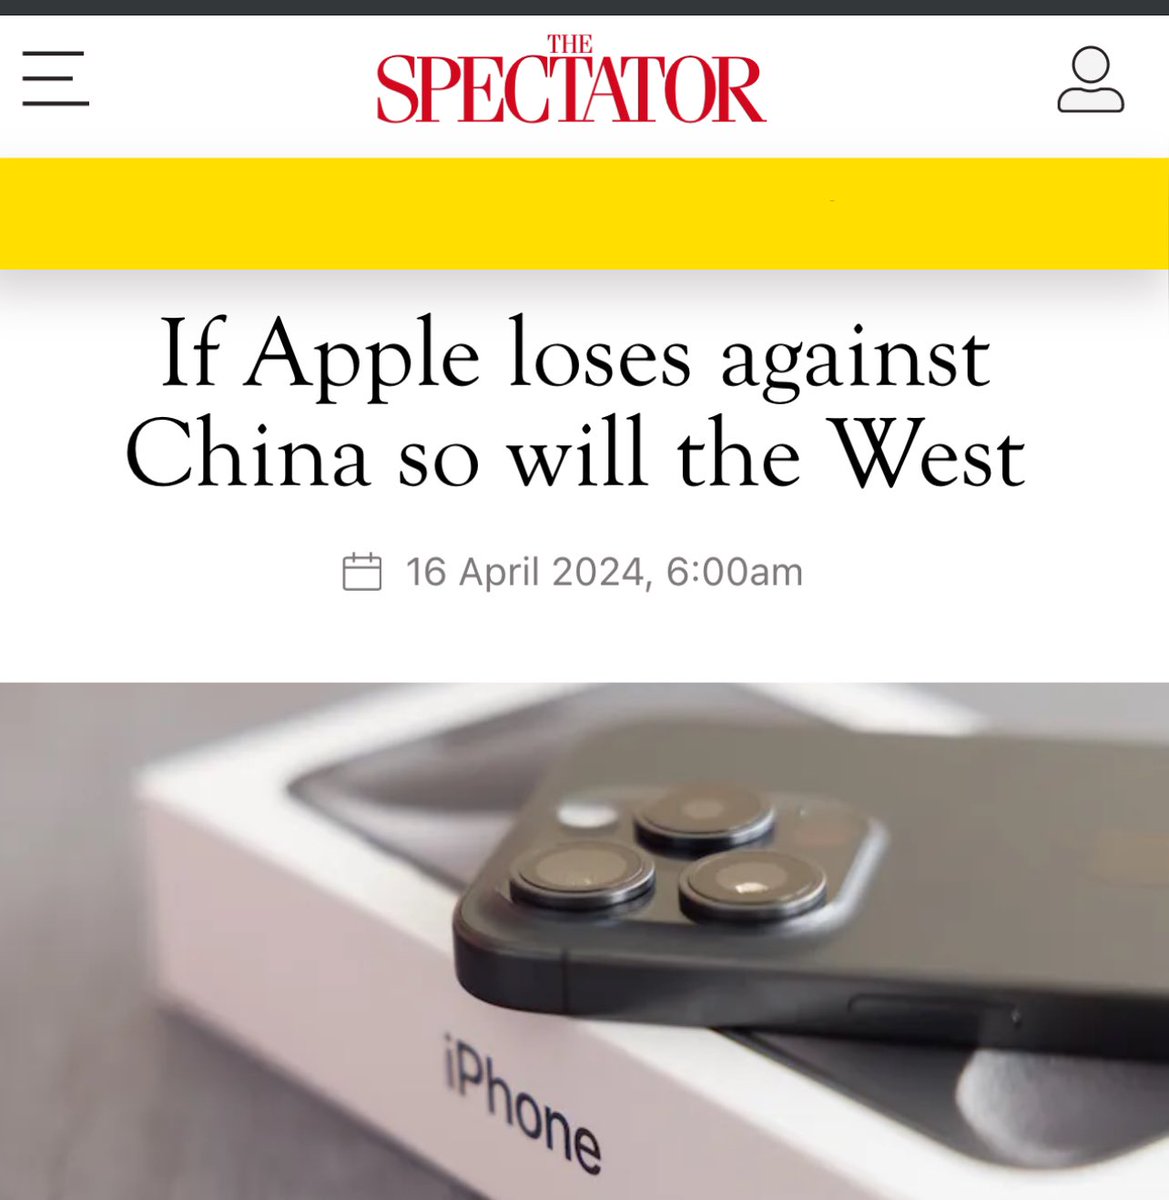 China model killing globalists’ cash cows

Driven by financial parasites, the US/EU gave up on productive industries like steel, automobile, shipbuilding, transportation etc.

Instead, the US economy let a handful of champions monopolize entire sectors — one Apple, one Tesla, one